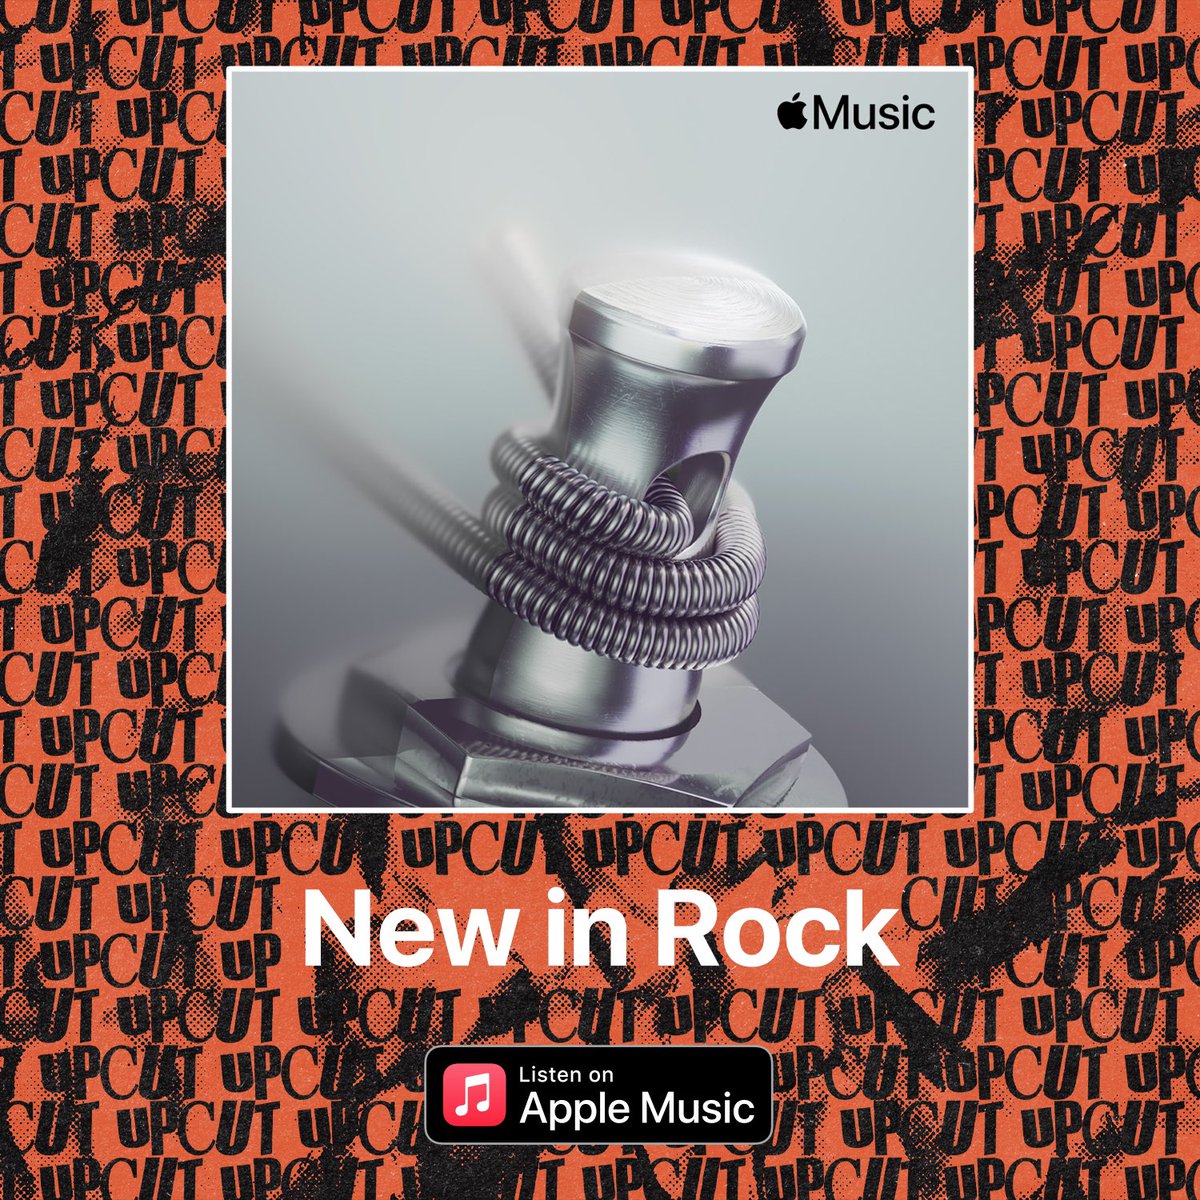 THANK YOU @applemusic for adding CUT UP along with Cry for Me to the NEW IN ROCK playlist 🤘🏻🤘🏻🤘🏻 we’ve got good company on there so go check it out 🙌🏻 

#applemusic #newinrock #alt #rock #indie #indieband #alternative #newwave #rockband #newmusic